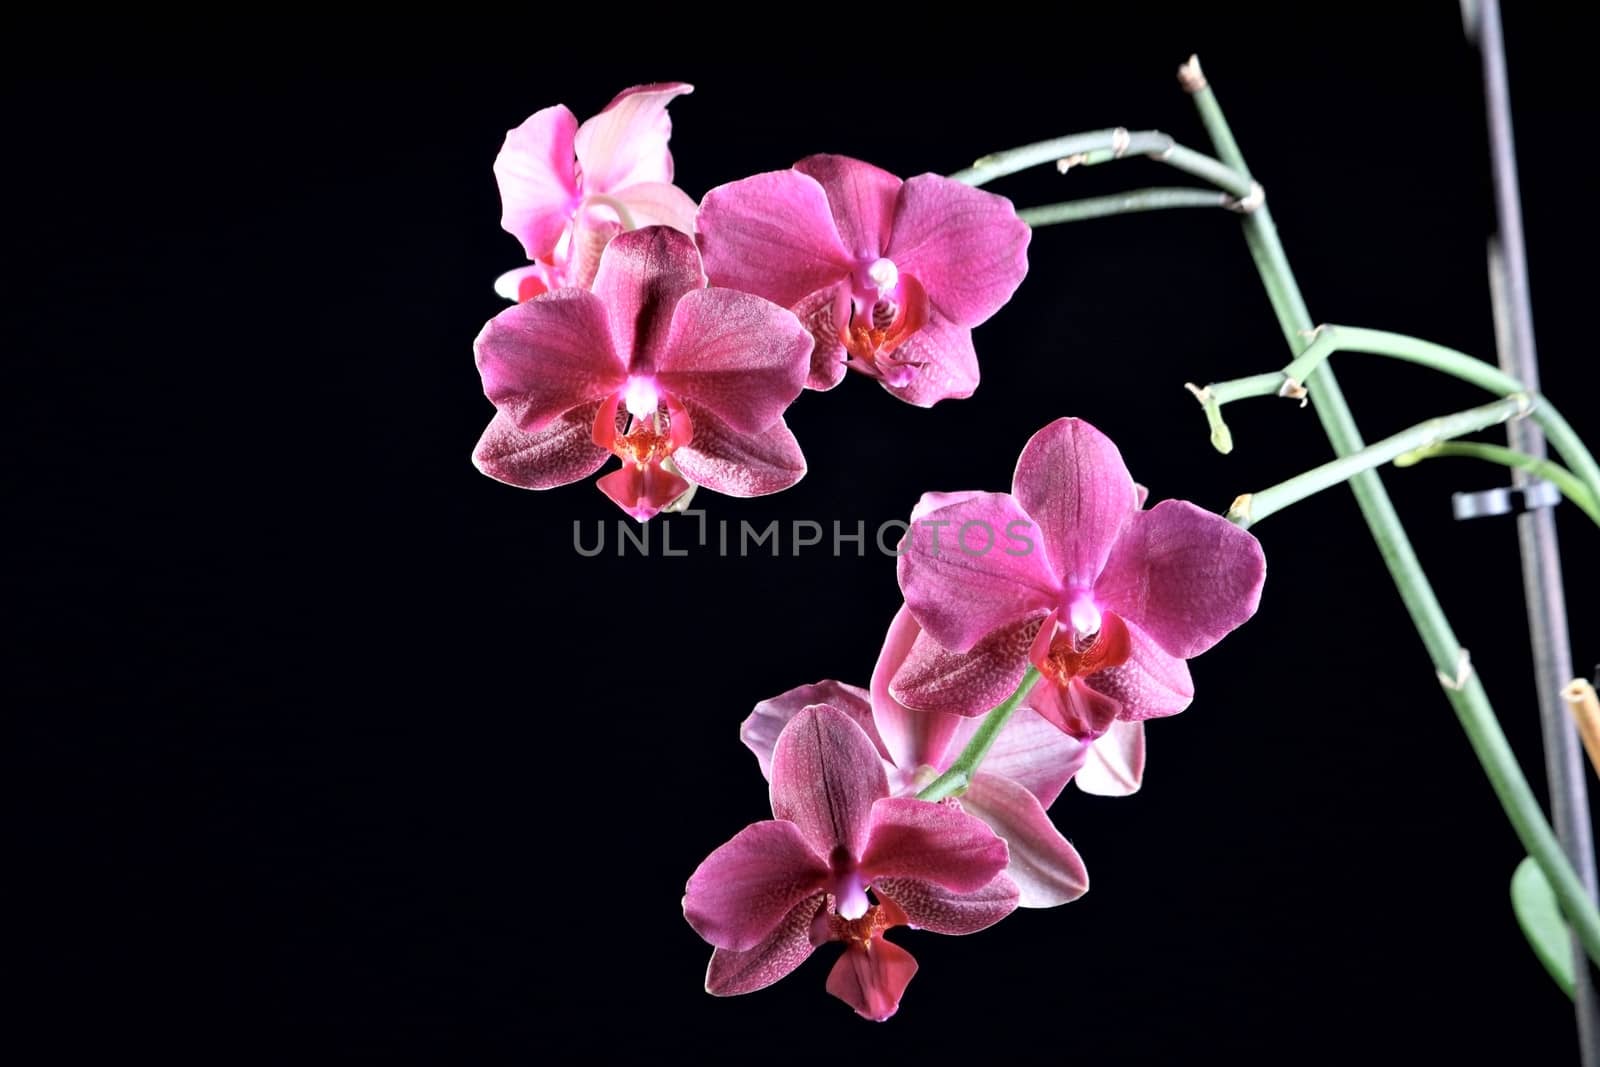 Beautoful orchid at the dark background by dedmorozz